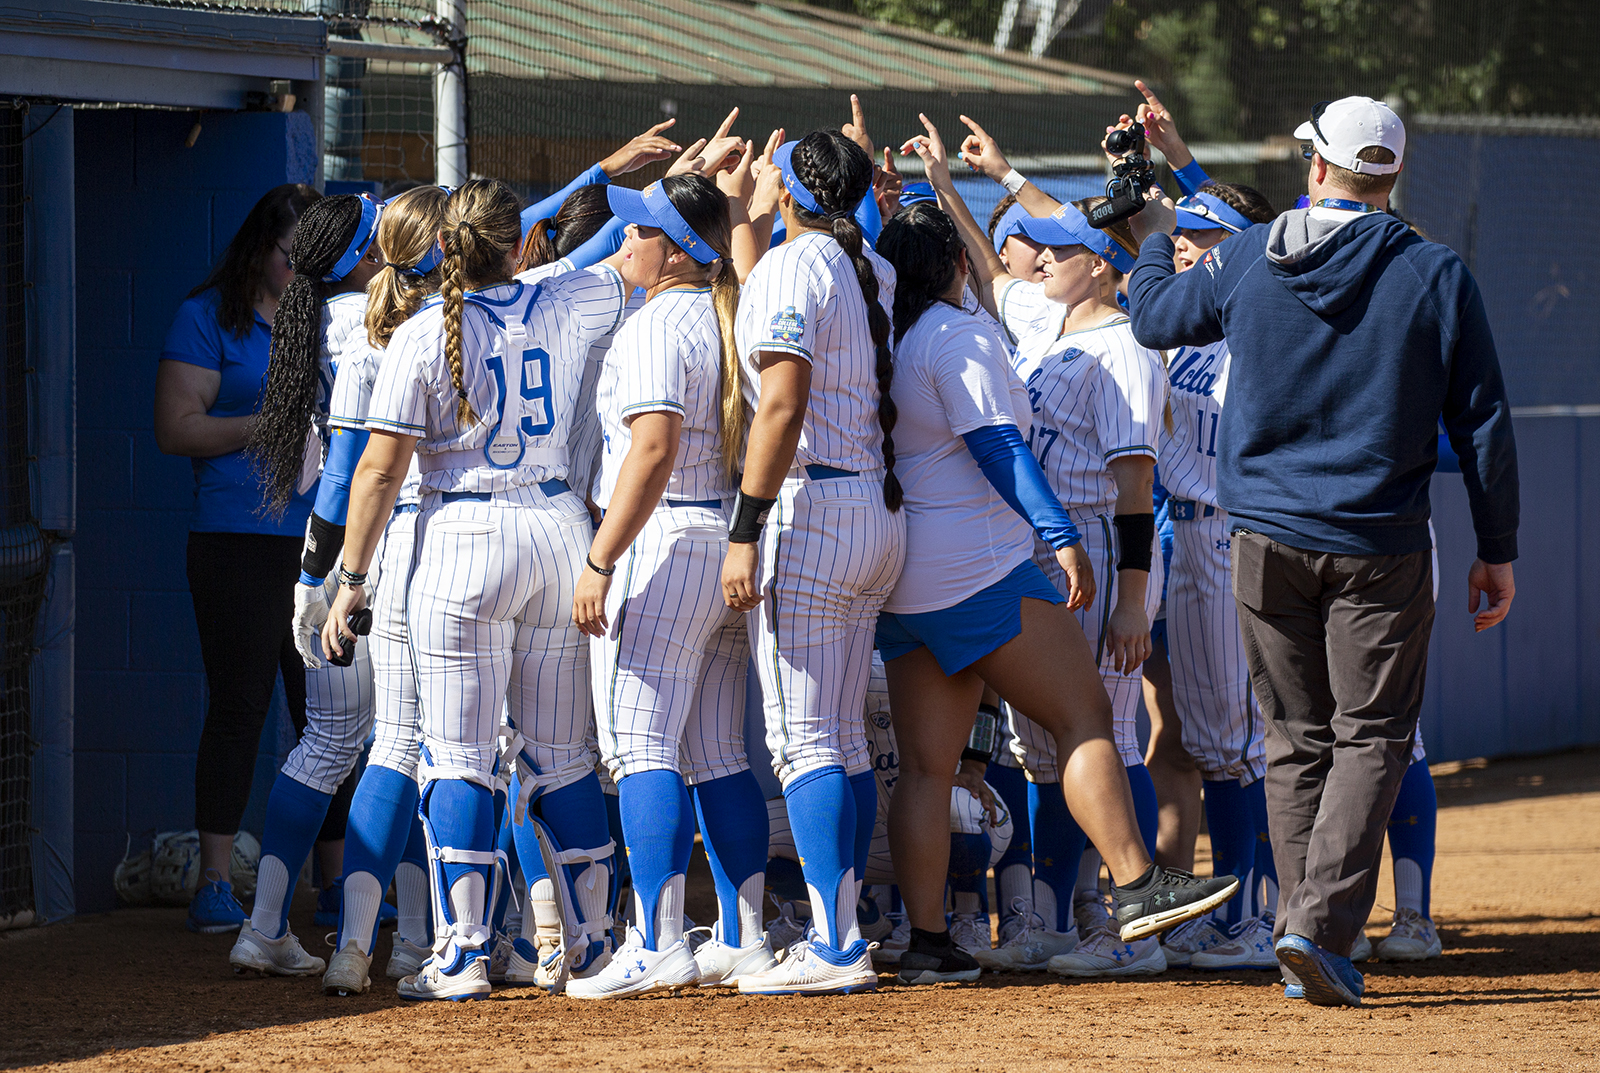 With undefeated record, UCLA softball continues tradition of strong season starts - Daily Bruin